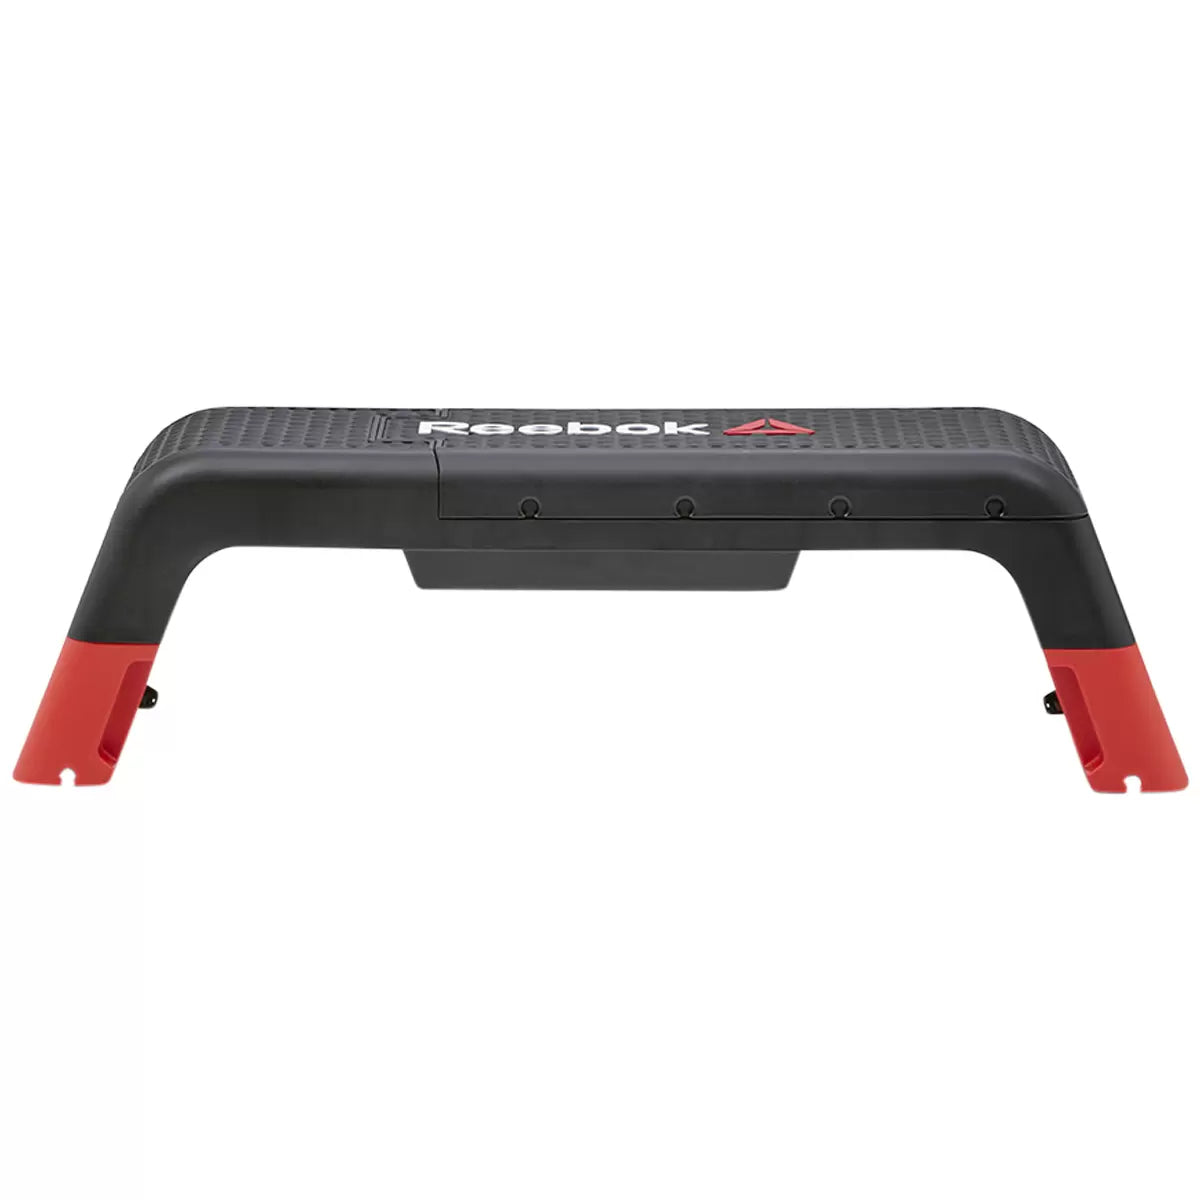 Reebok Adjustable Bench & Step - Strength & Core Training at Home Equipment - evryfit - accessories, aerobic step, bench, deck, fitness deck, step